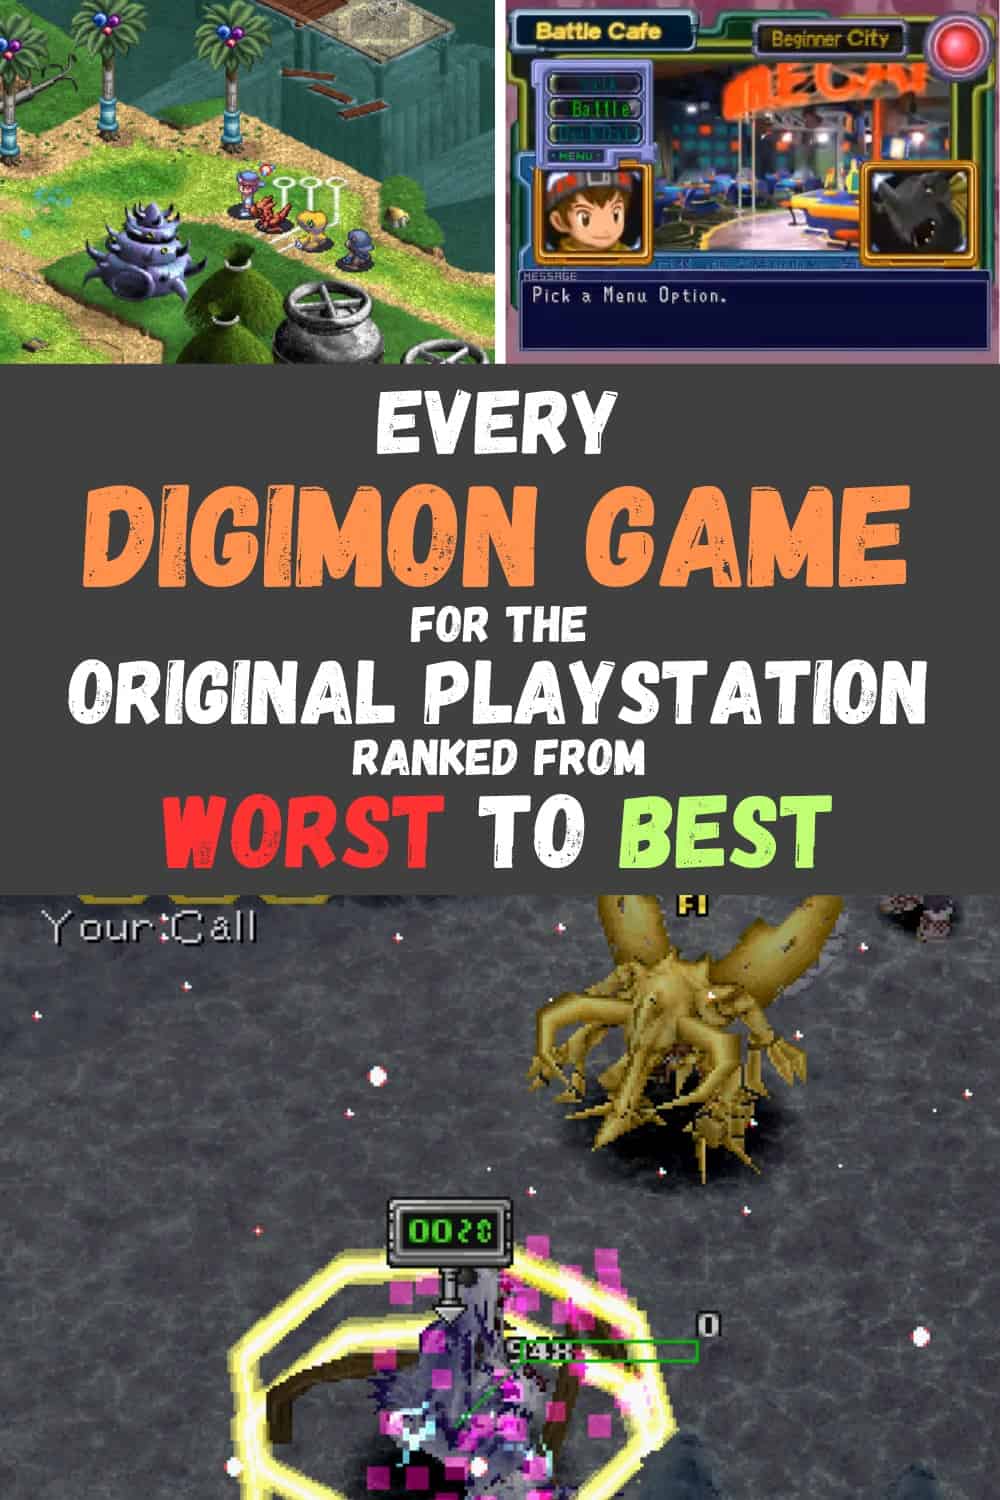 What is the Best Digimon game for PlayStation?